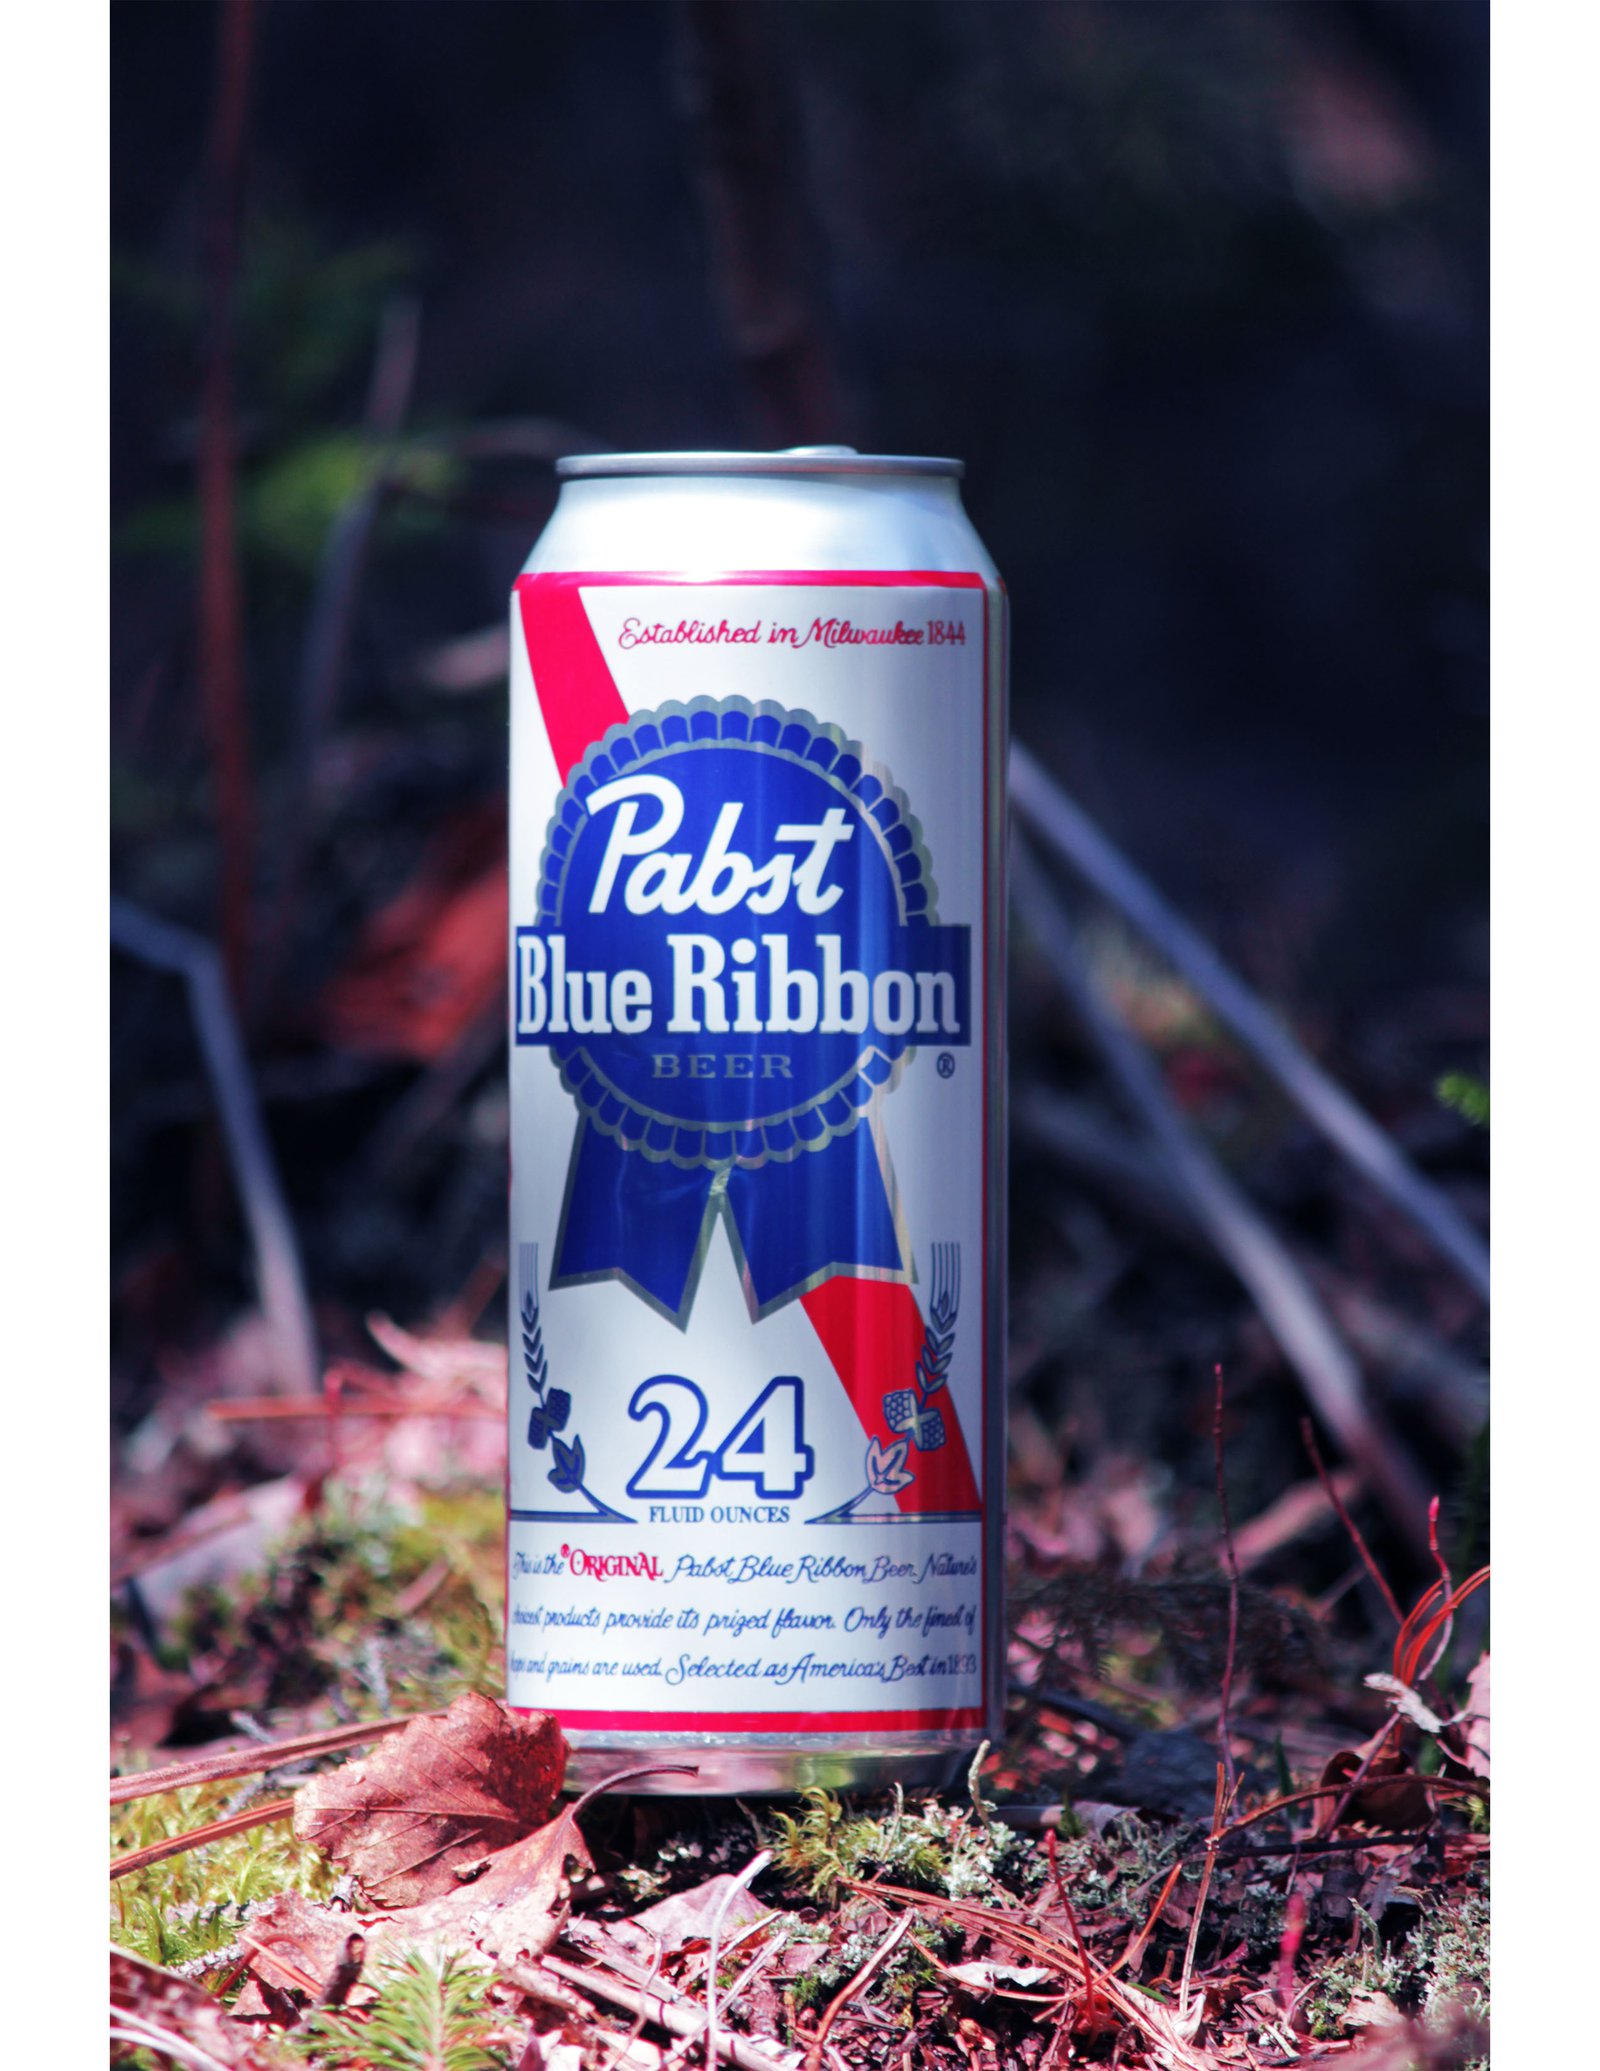 pbr can